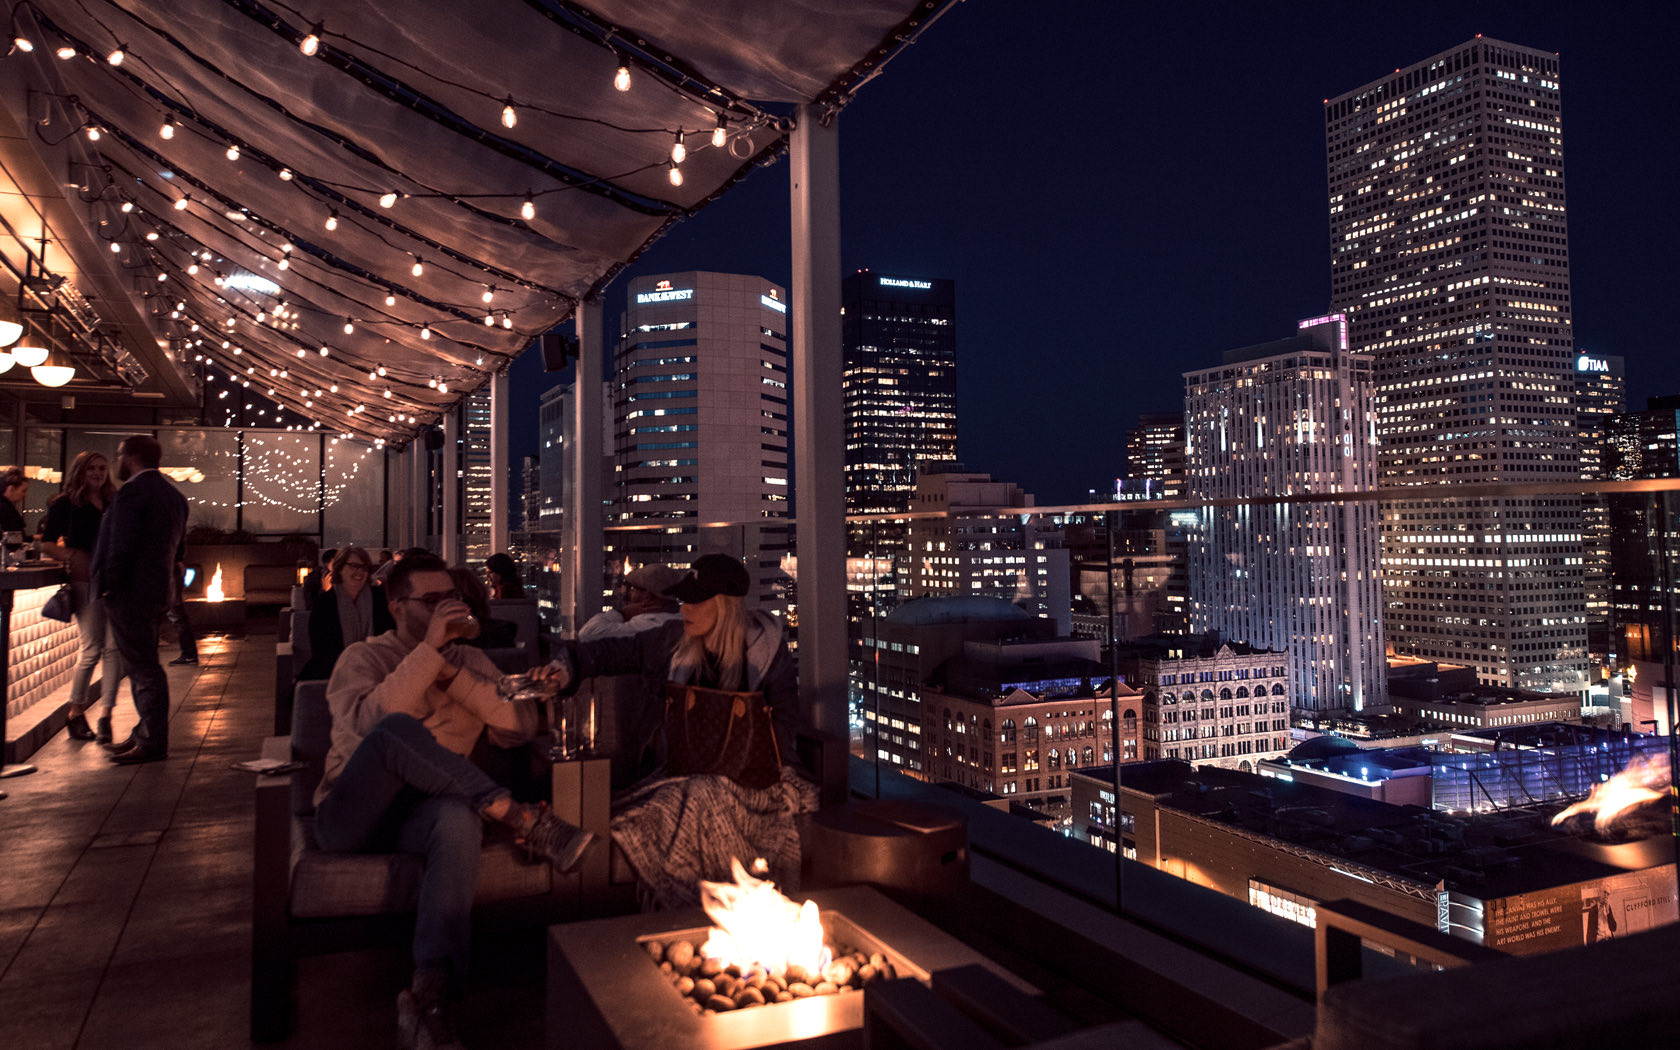 people gathered at the rooftop bar having some fun and warm time up at night